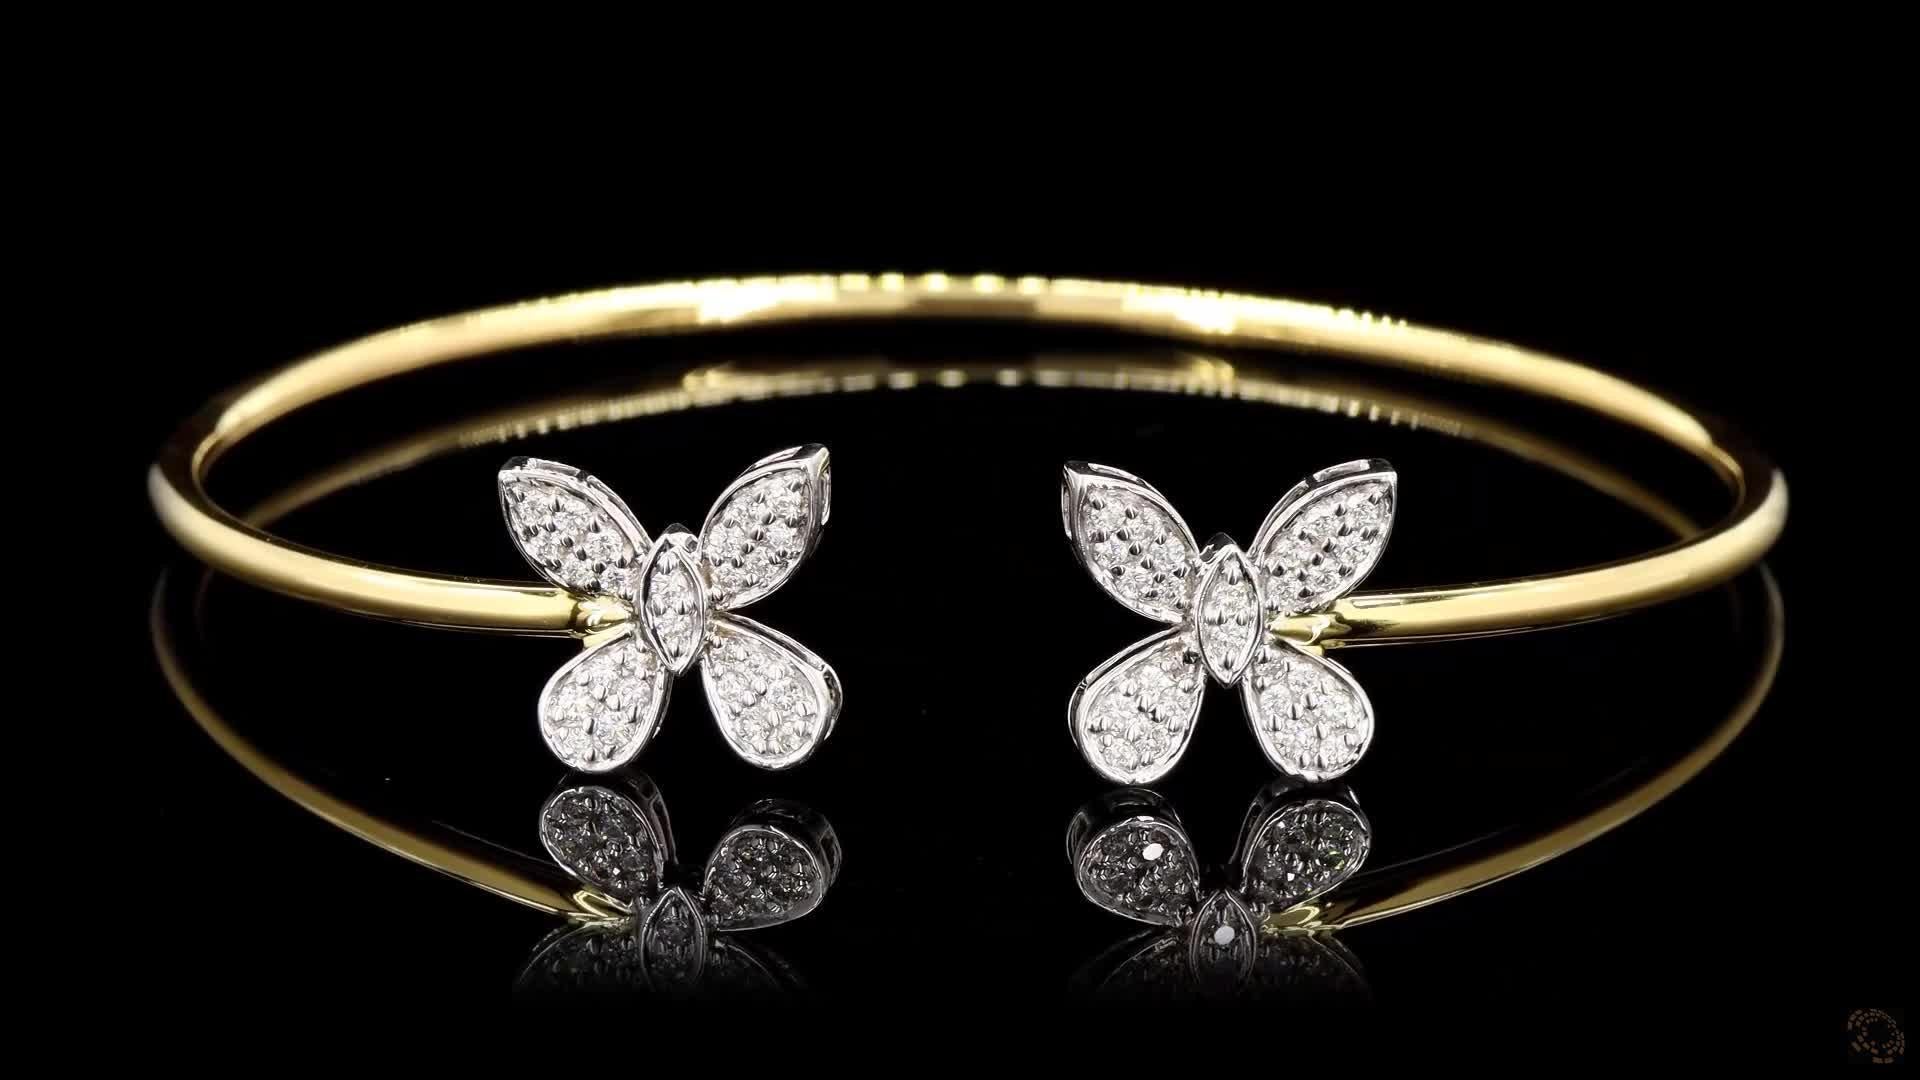 PANIM 0.38 Carat 18K Yellow Gold Diamond Butterfly Bracelet

Bracelets are worn to enhance the look. Women love to look good. Women often wear exquisite gold bracelets on their wrists, and this is quite usual. Every woman should own a diamond